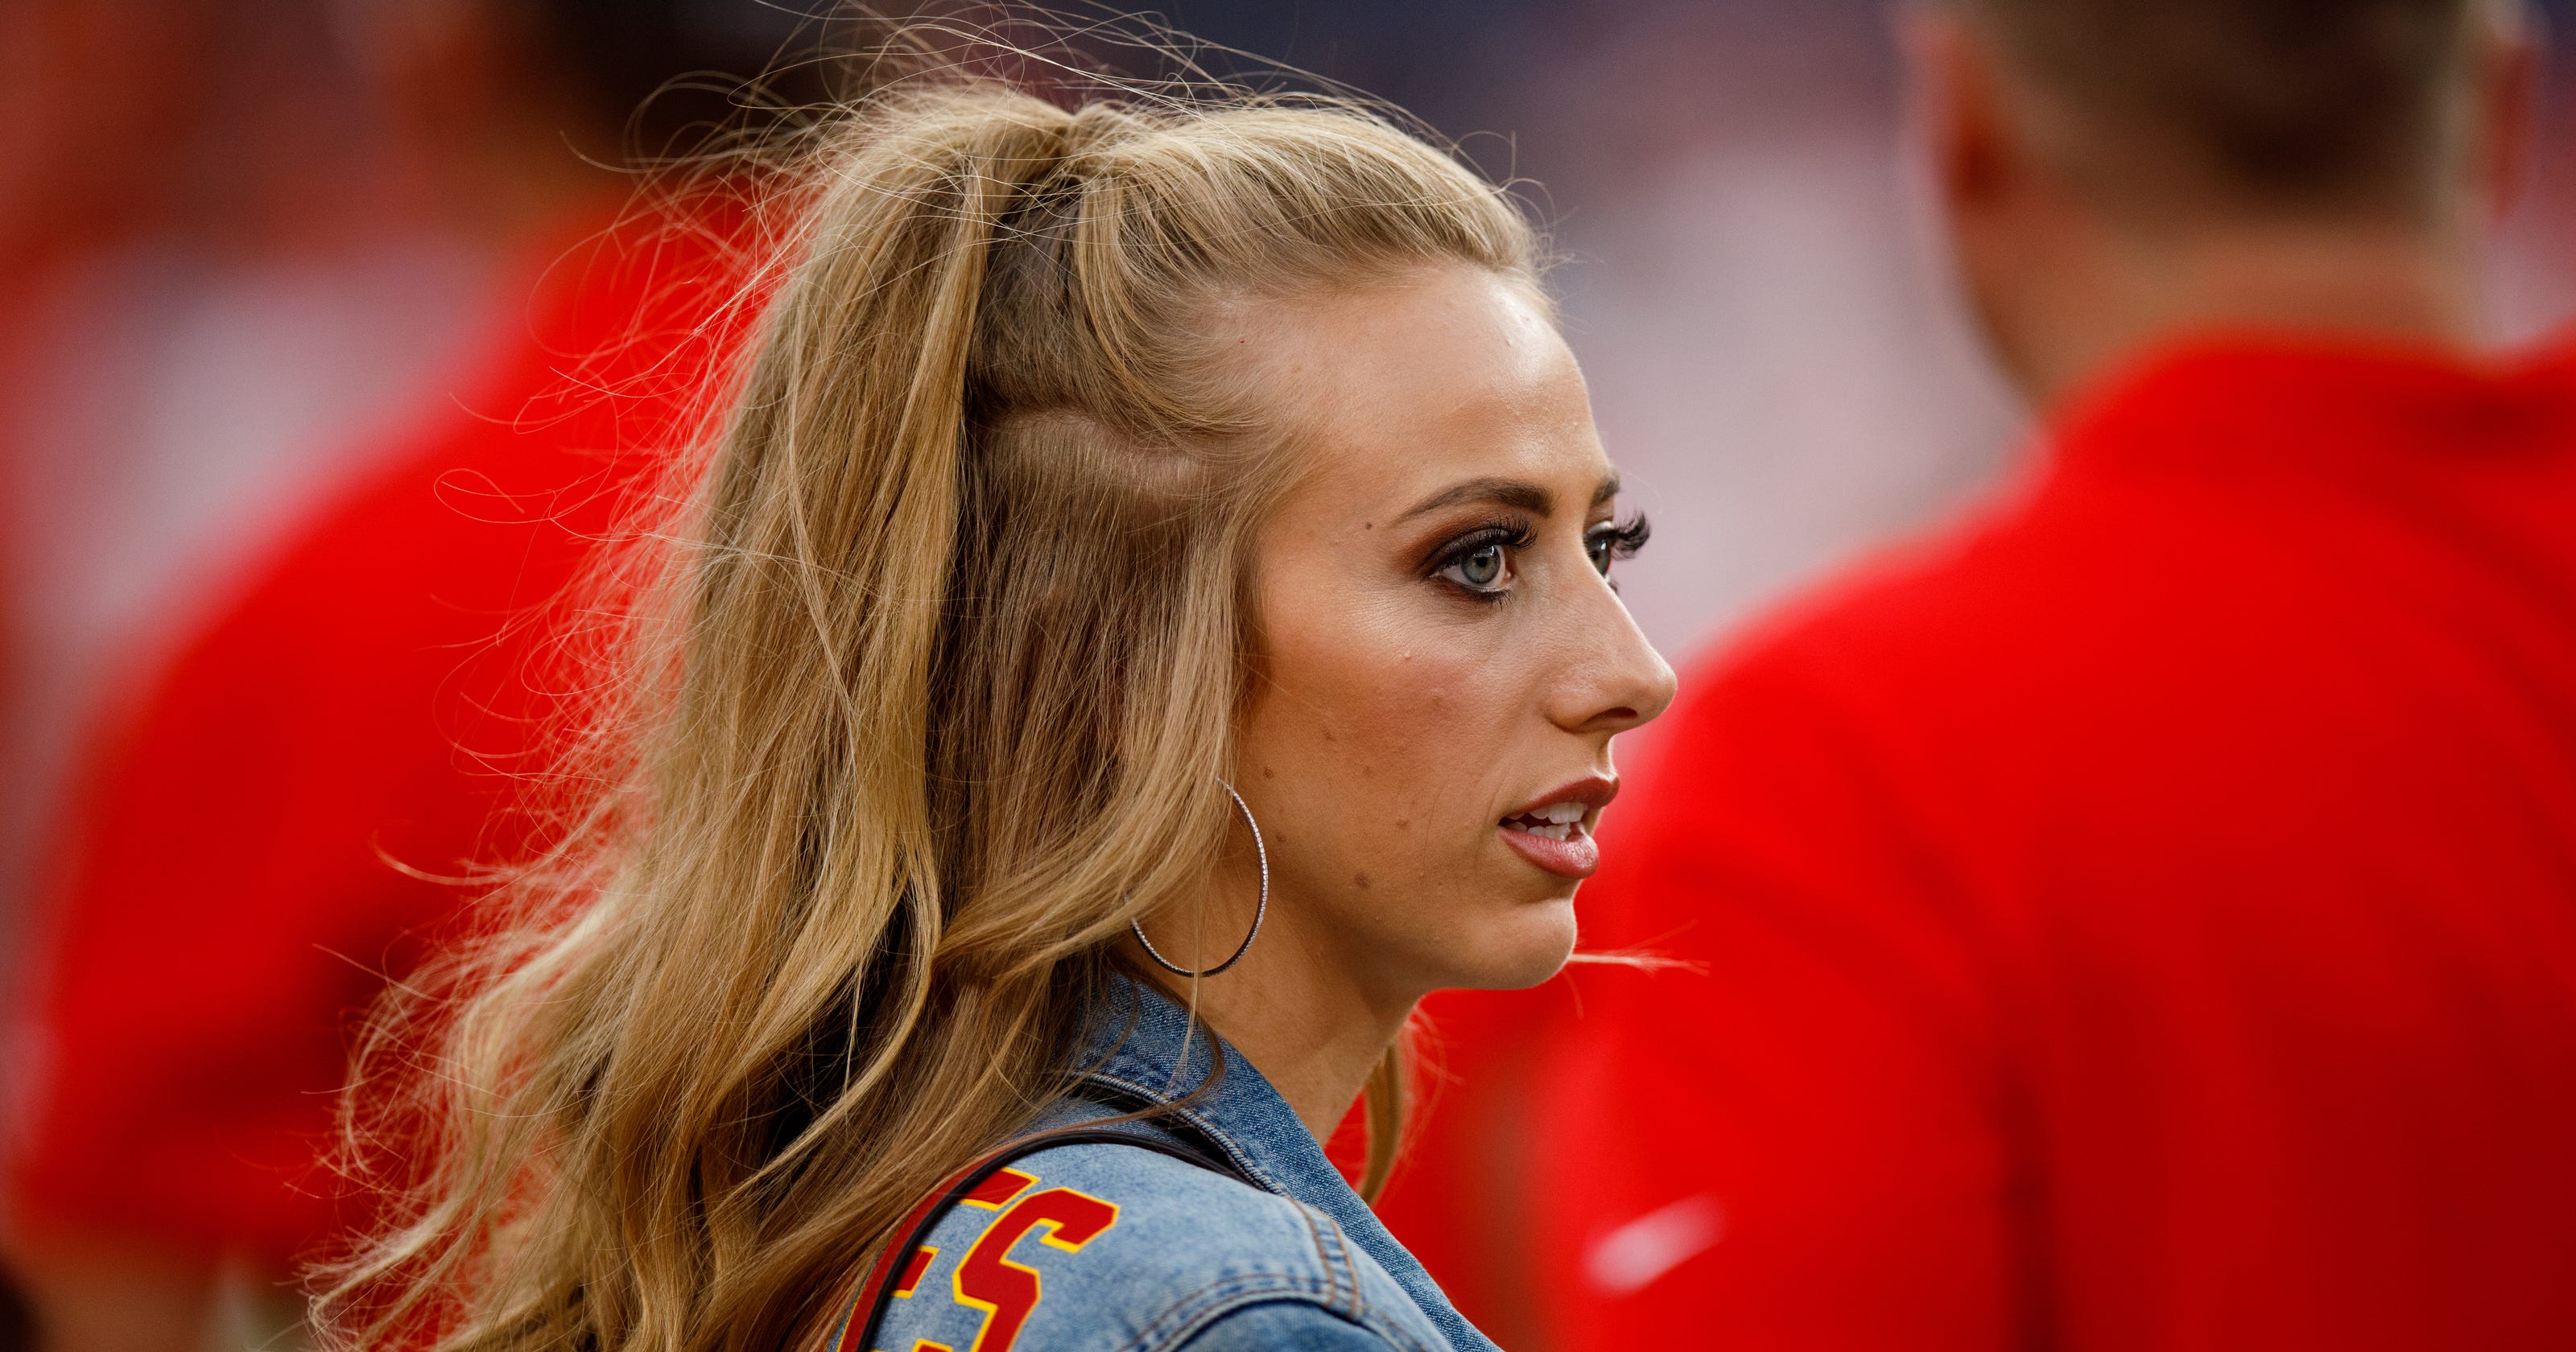 Patrick Mahomes' girlfriend: Fans harassed her at Chiefs-Patriots game3200 x 1680